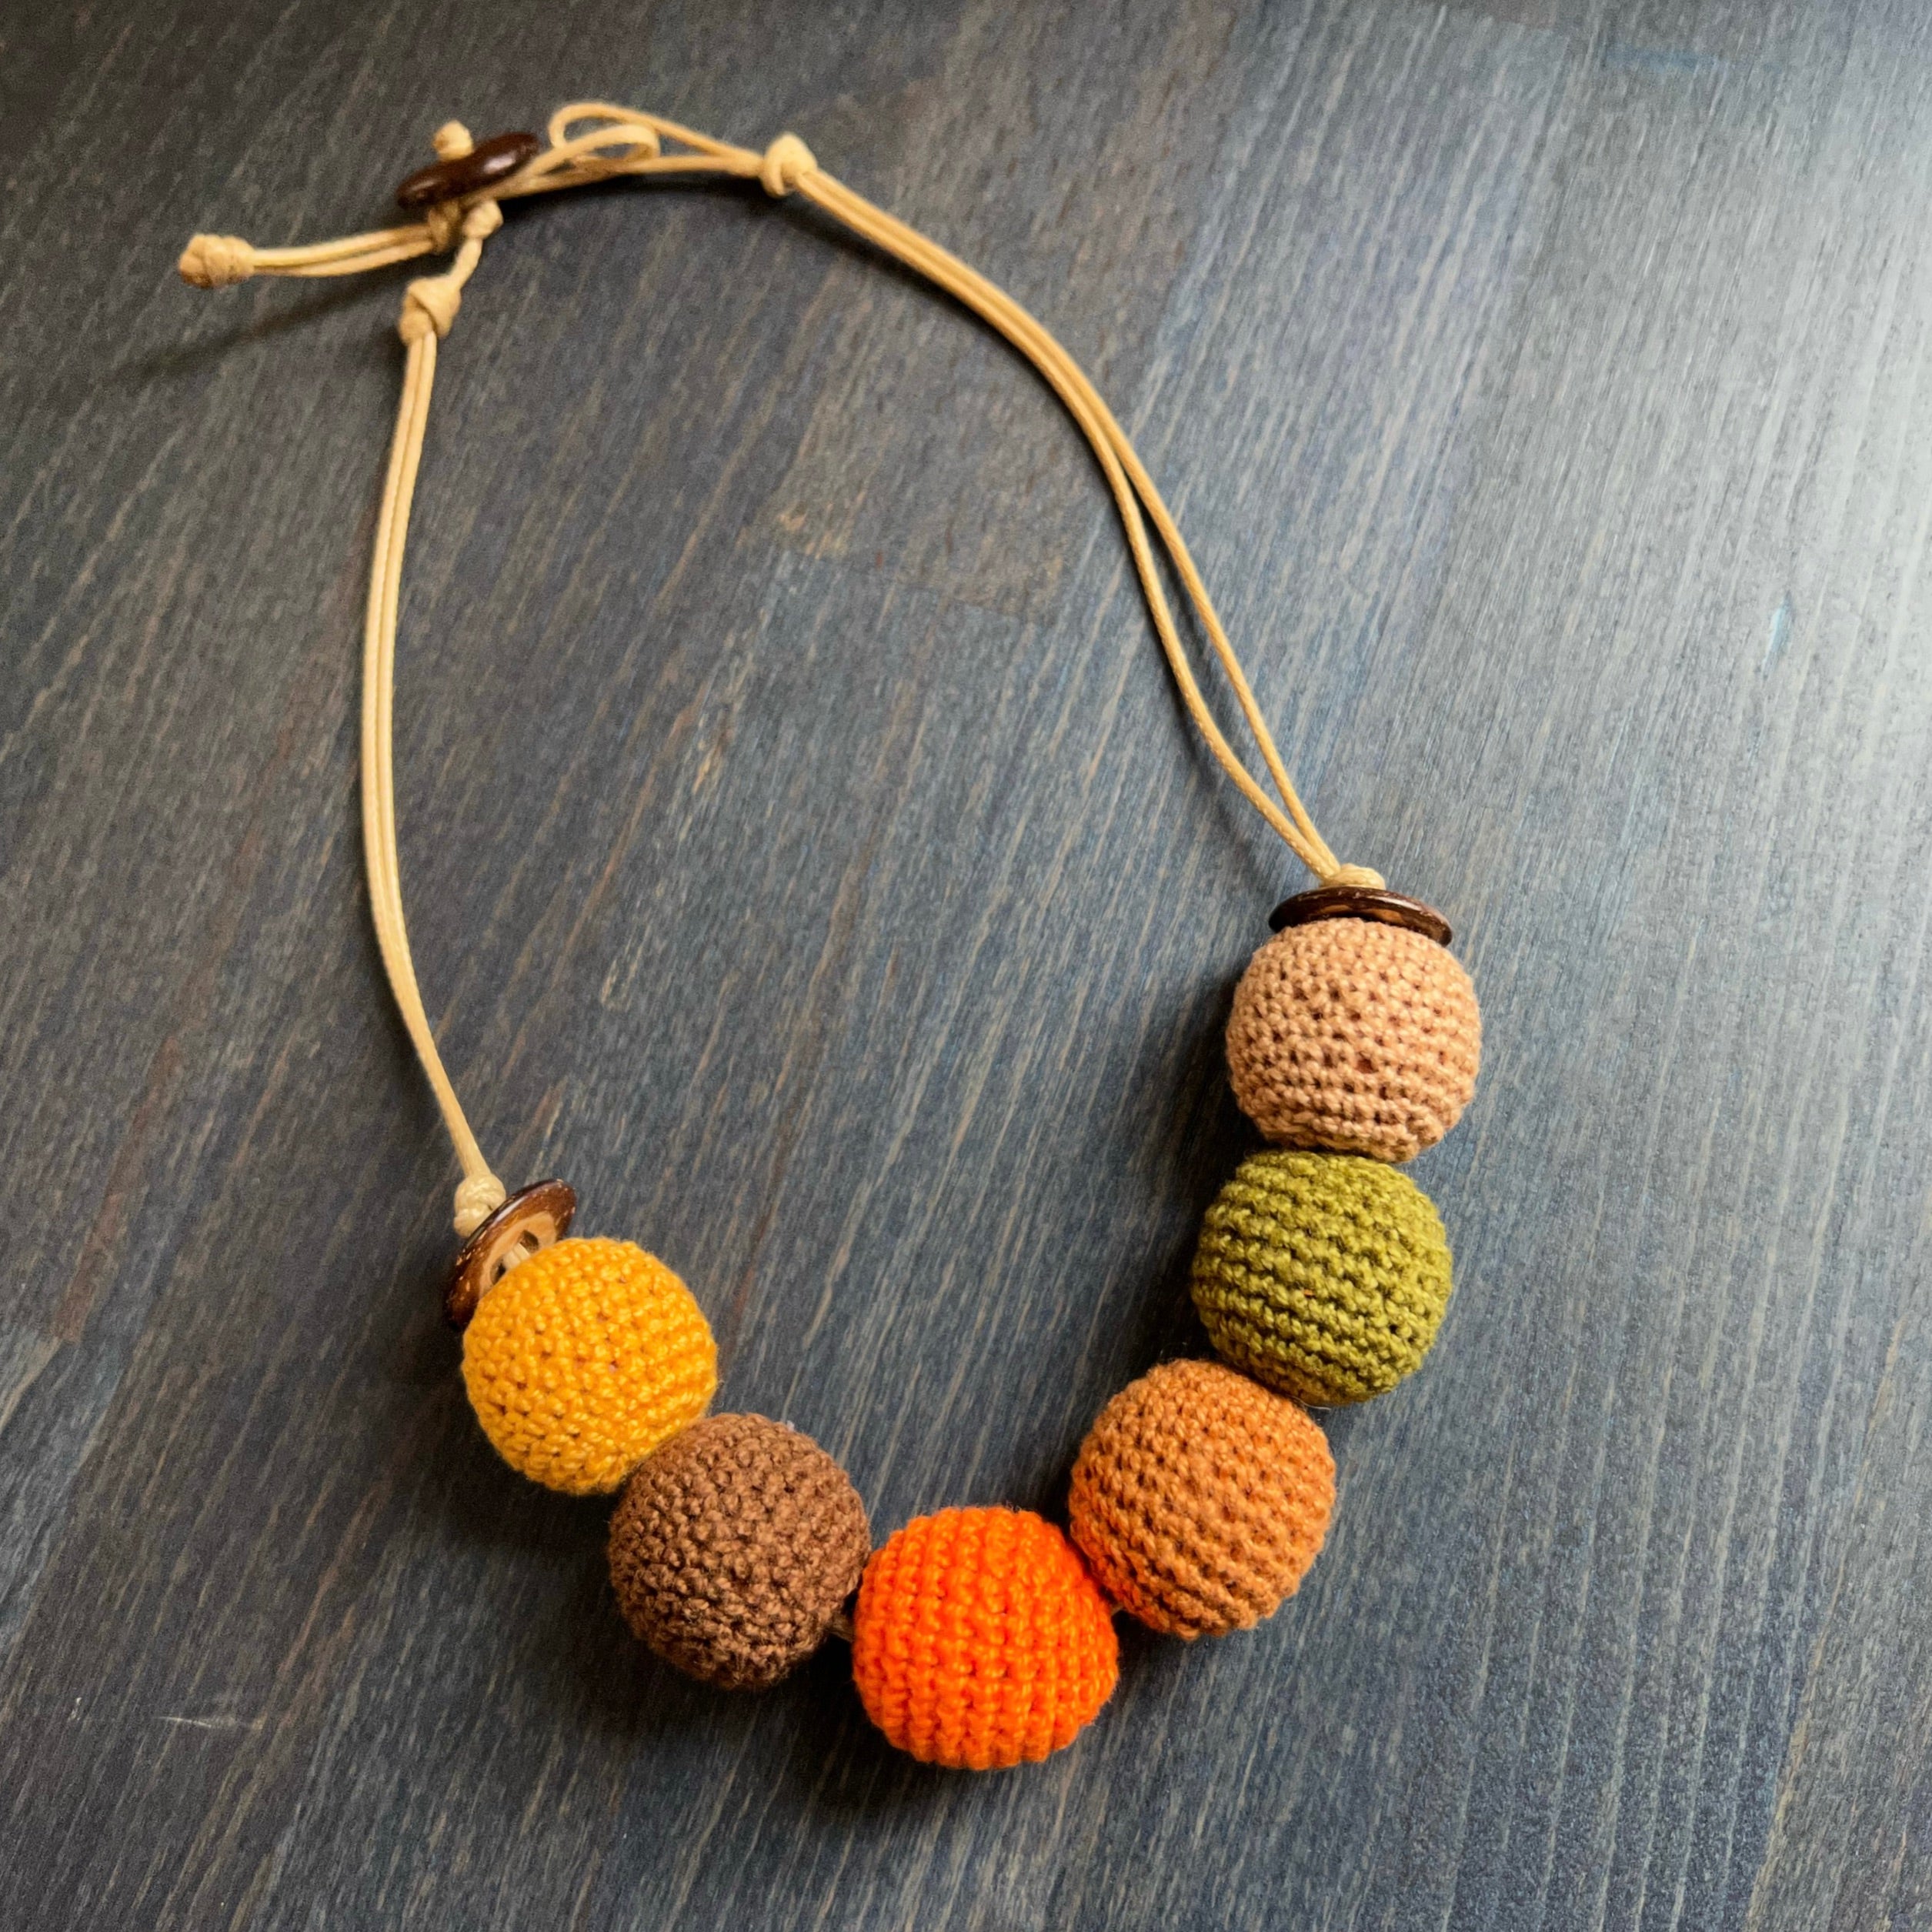 Crochet Beads Necklace · How To Knit Or Crochet A Knit Or Crochet Necklace  · Yarncraft on Cut Out + Keep